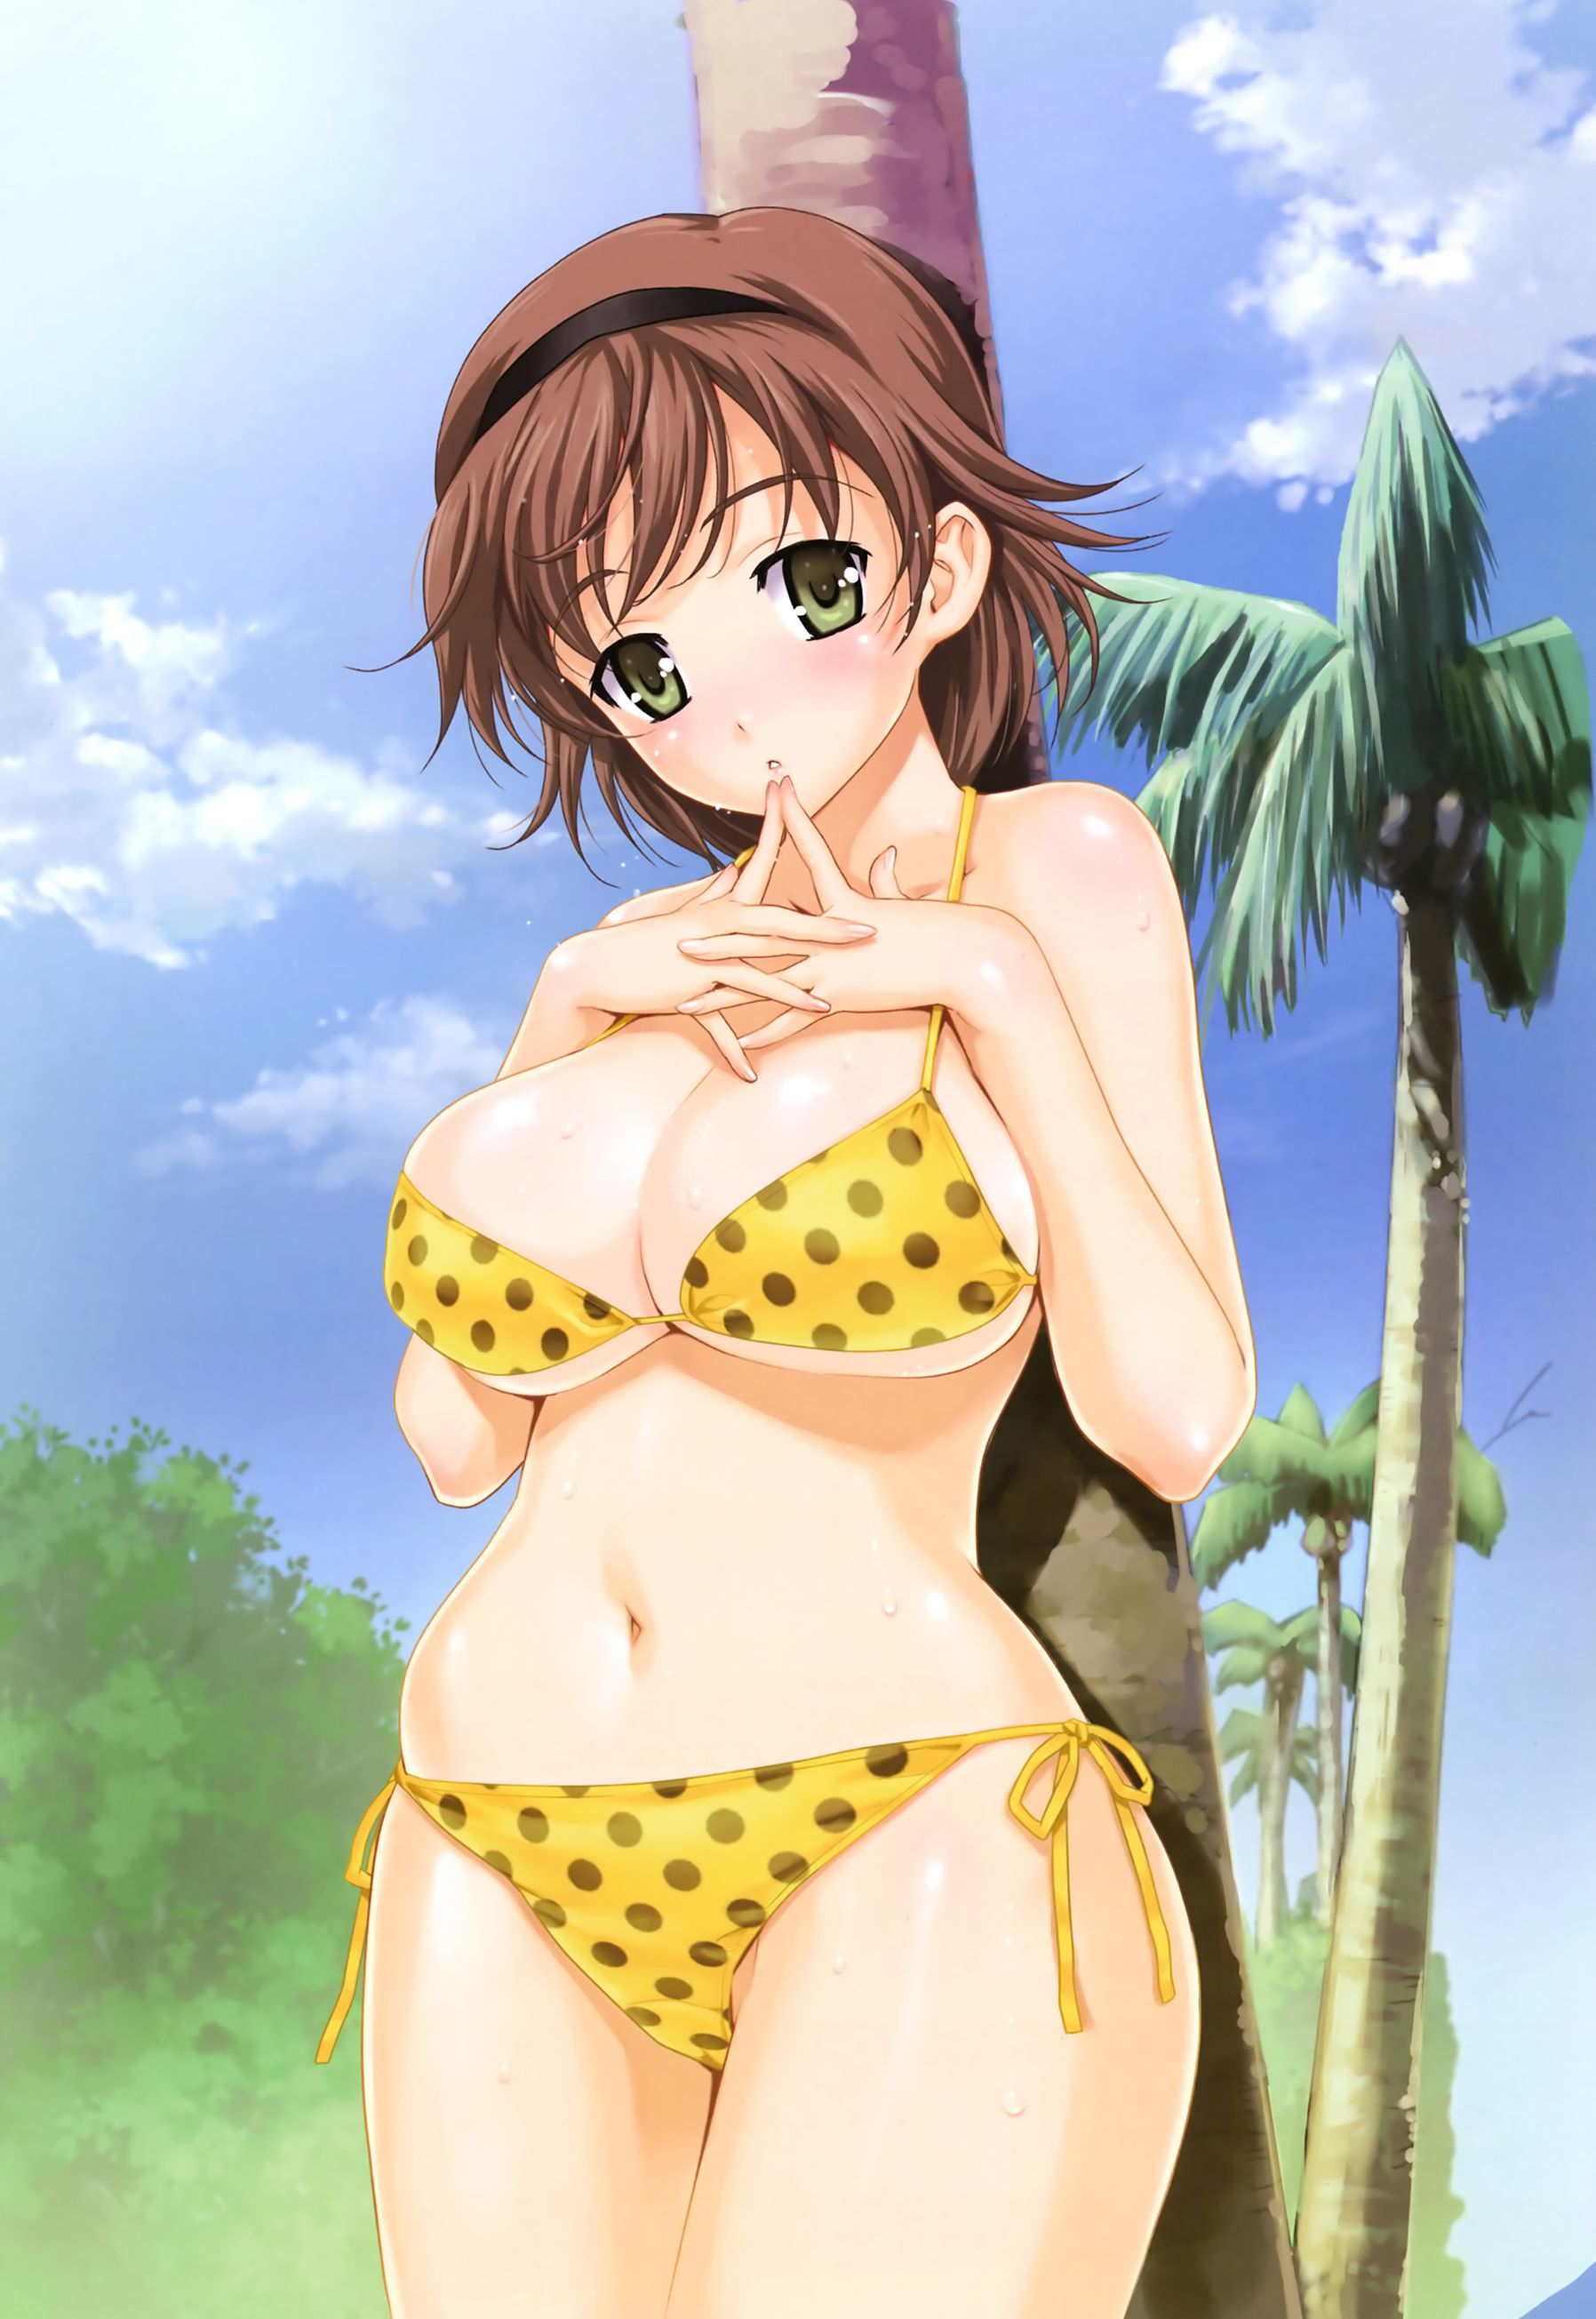 Refreshes the skin component for girl bikini pictures. Vol.10 3